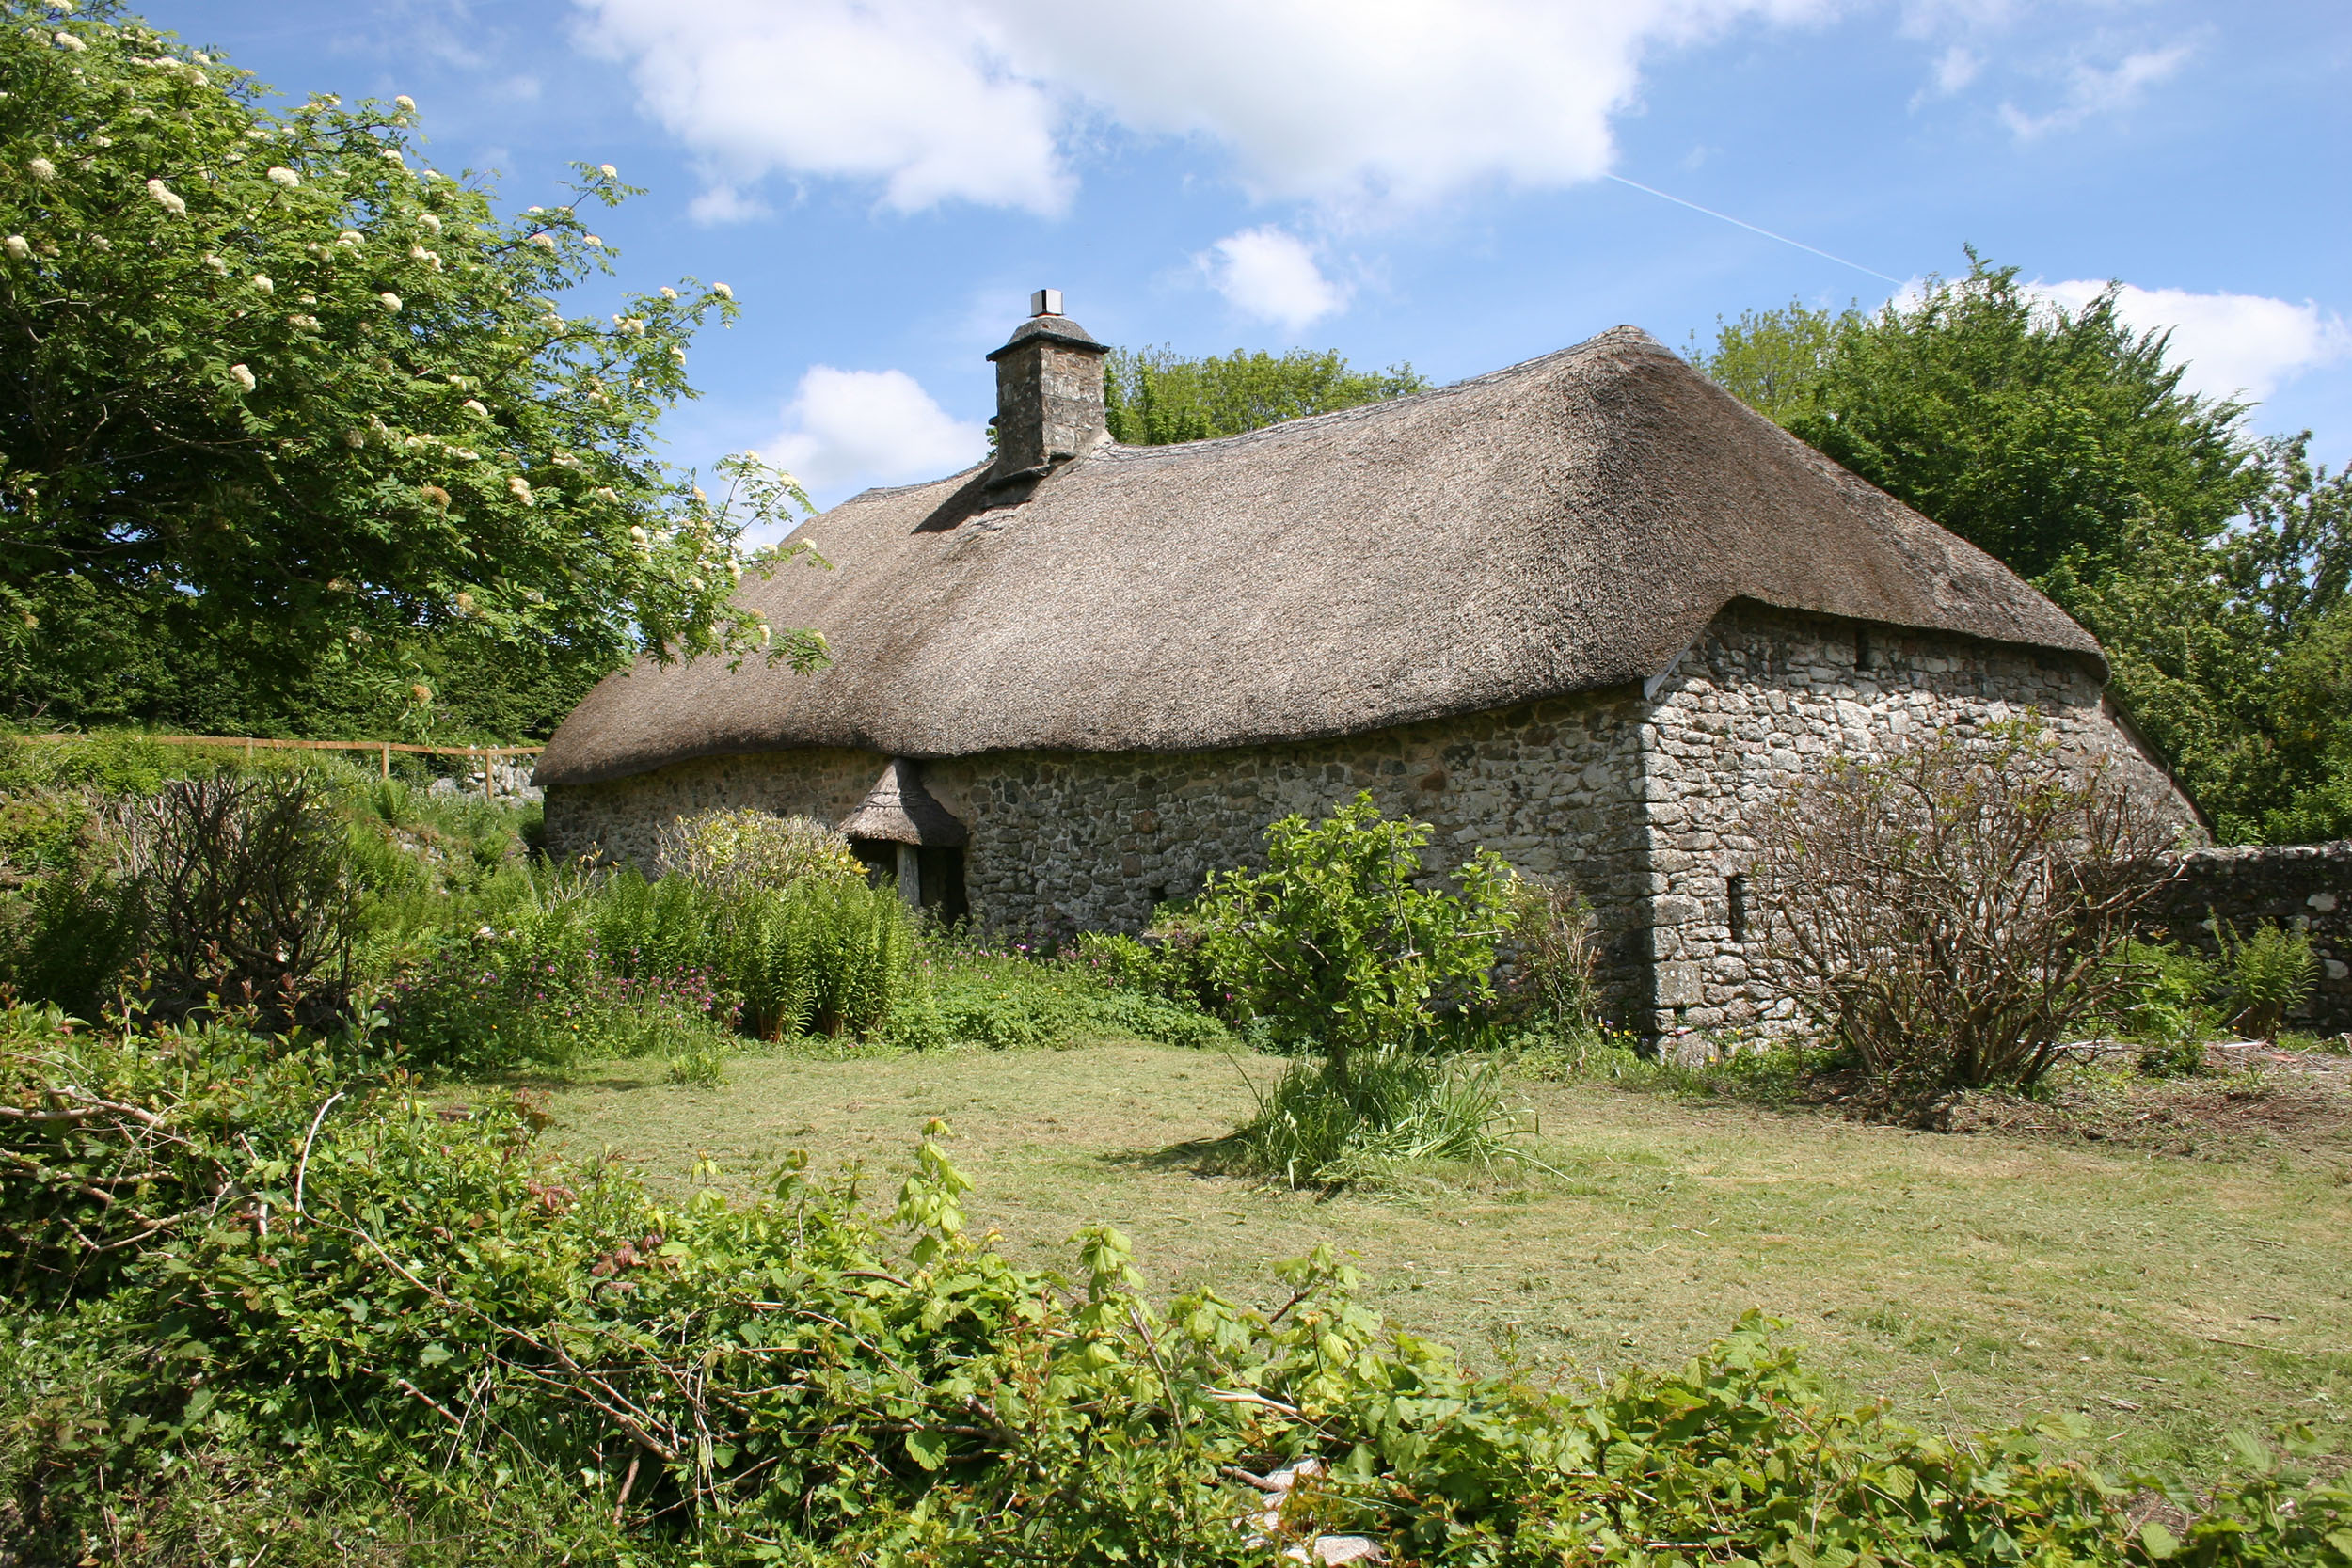 Traditional stone longhouse with thatched roof.